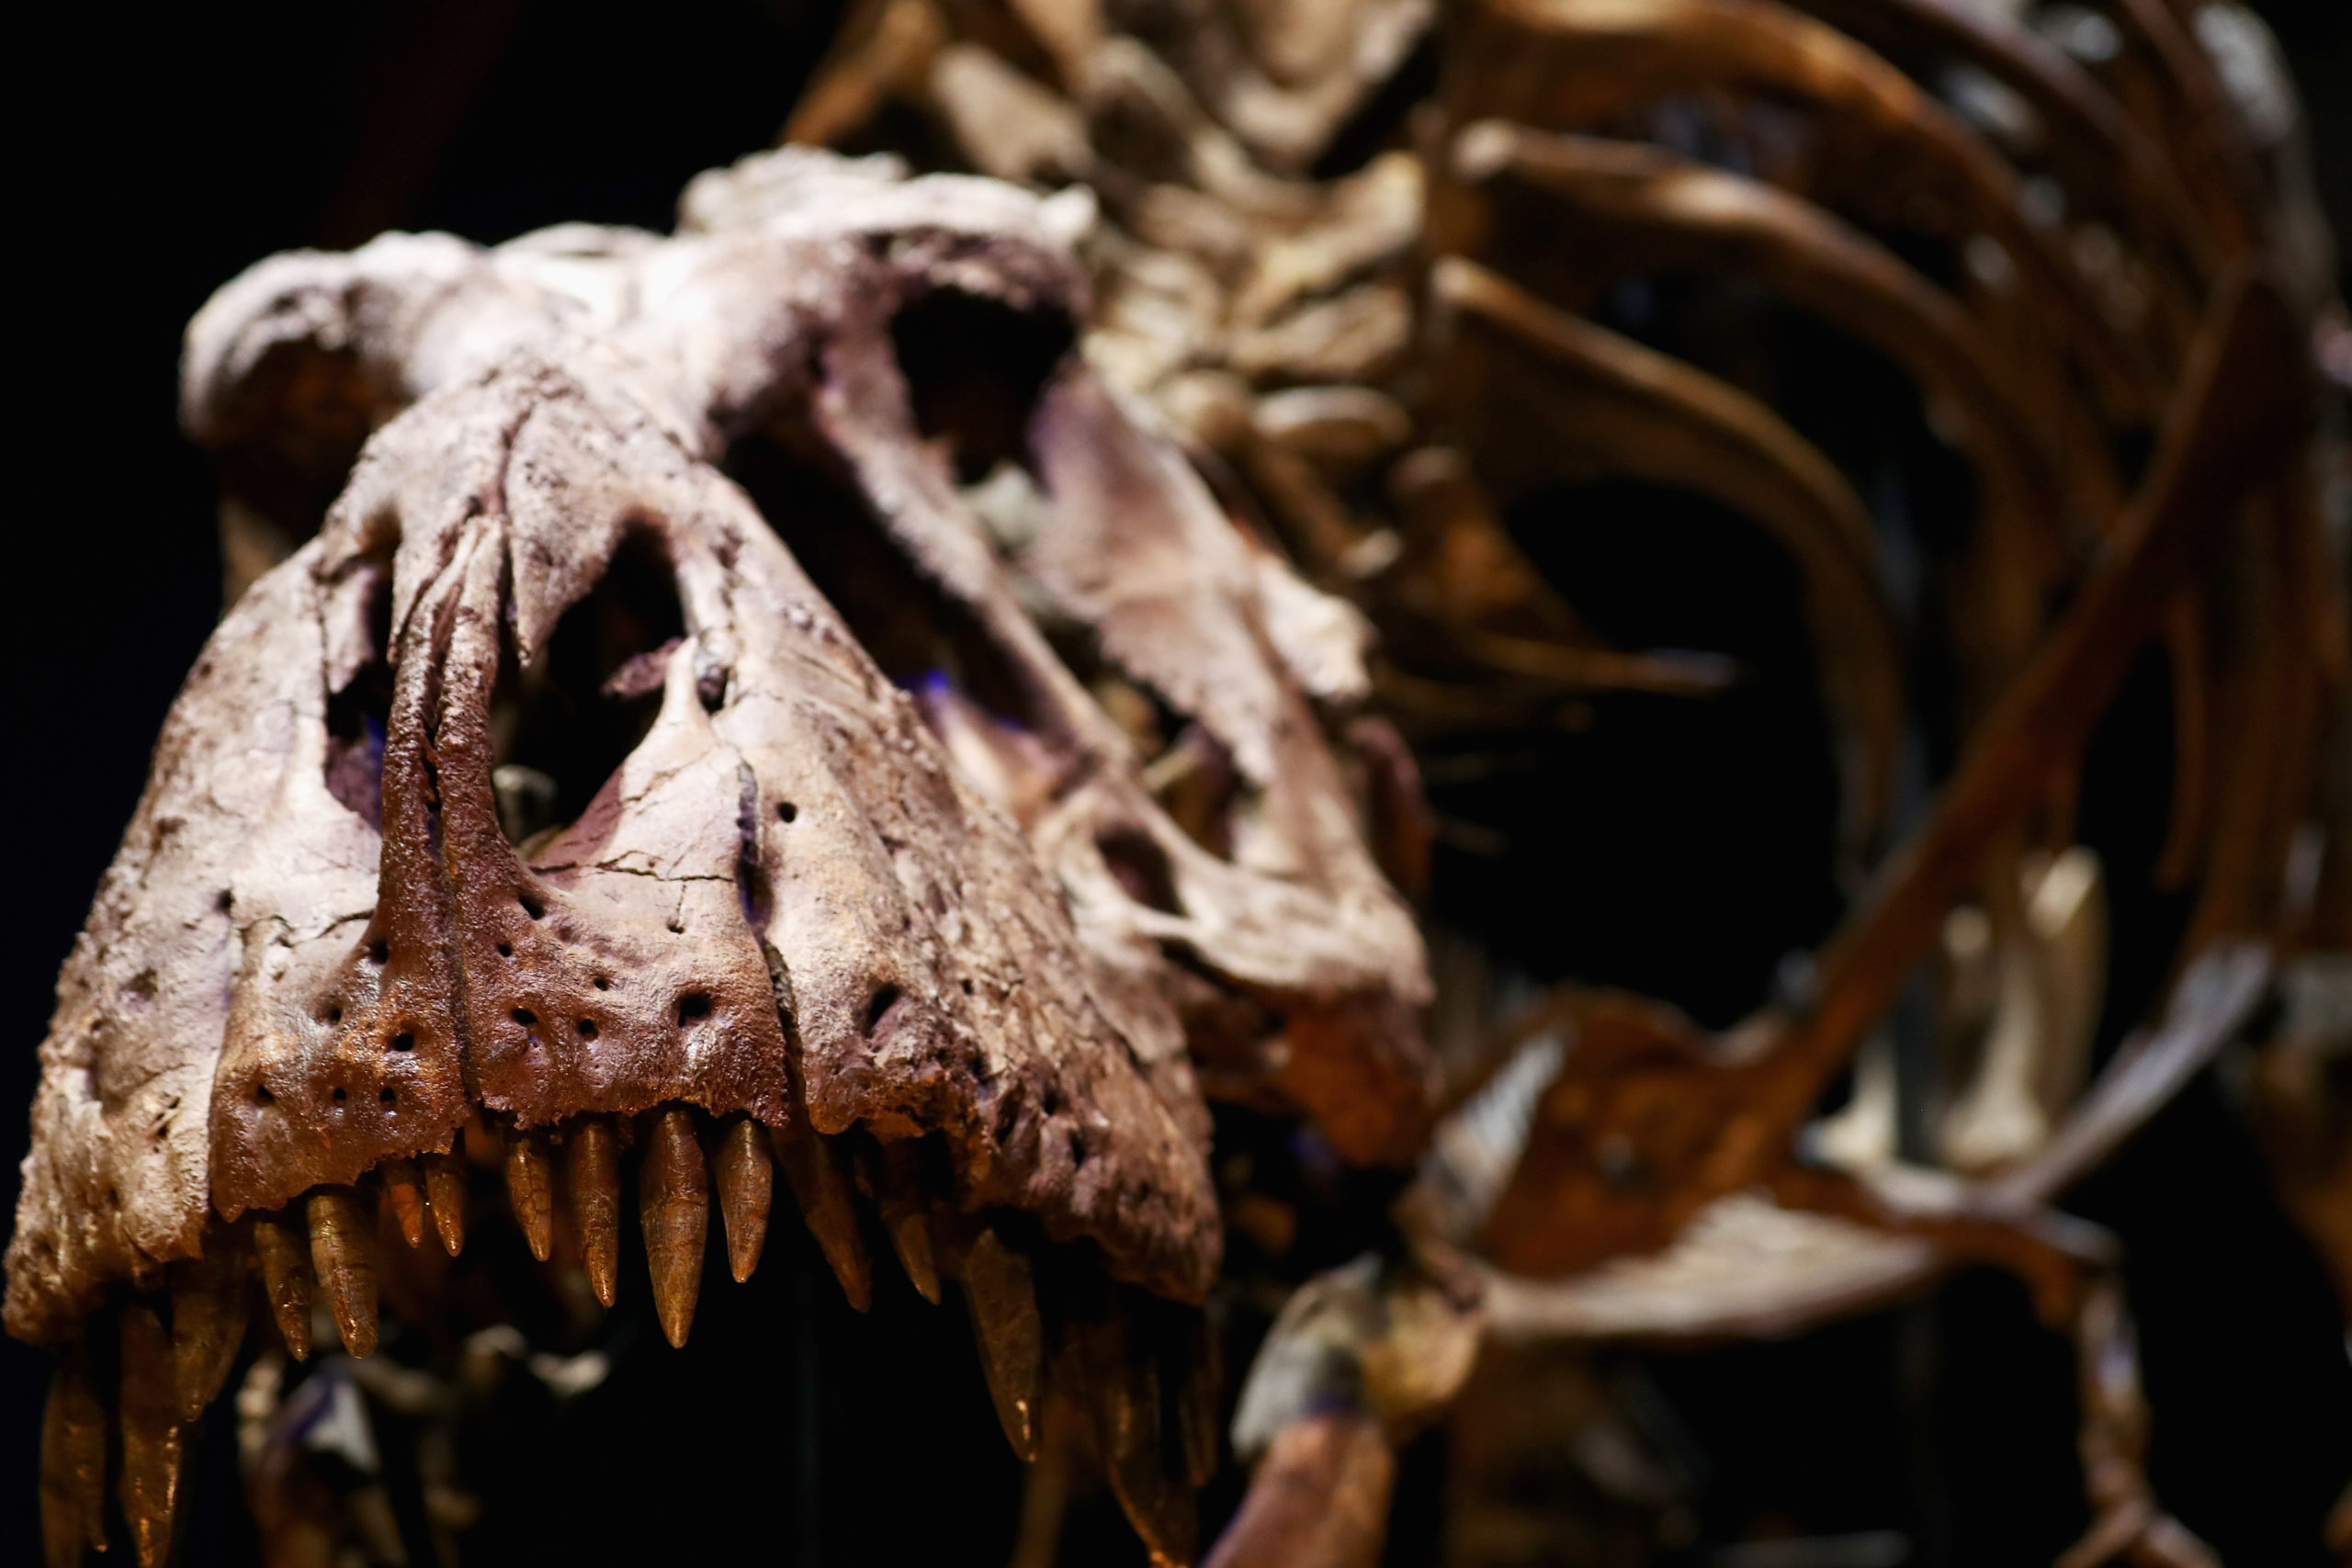 The skull, jaw, and teeth of a T-Rex exhibition at the Natural History Museum of Leiden.